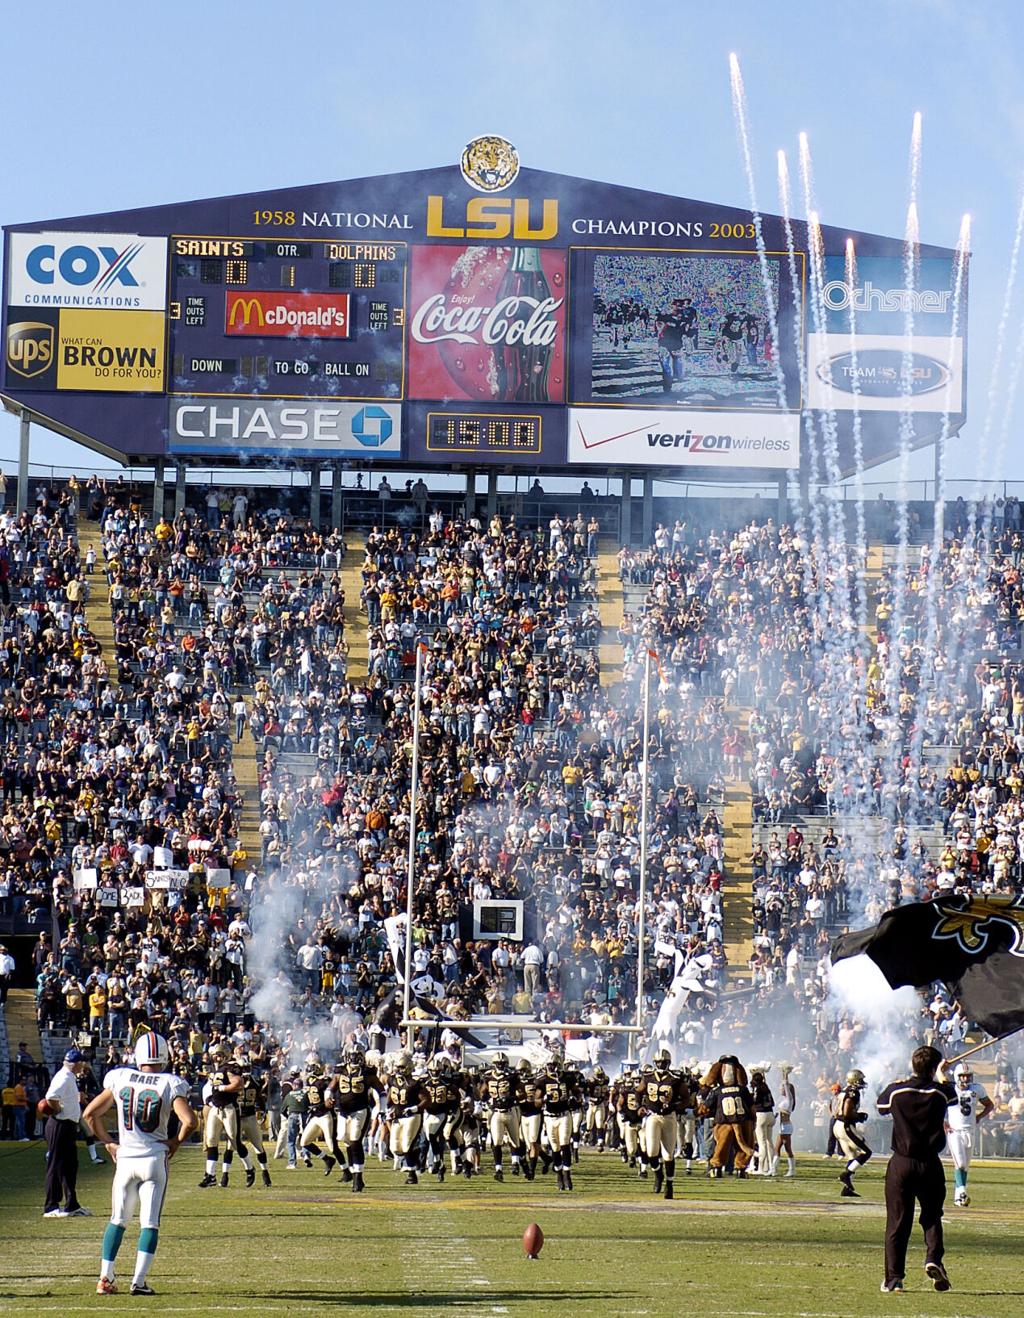 New Orleans Saints in talks to move home games to LSU's Tiger Stadium